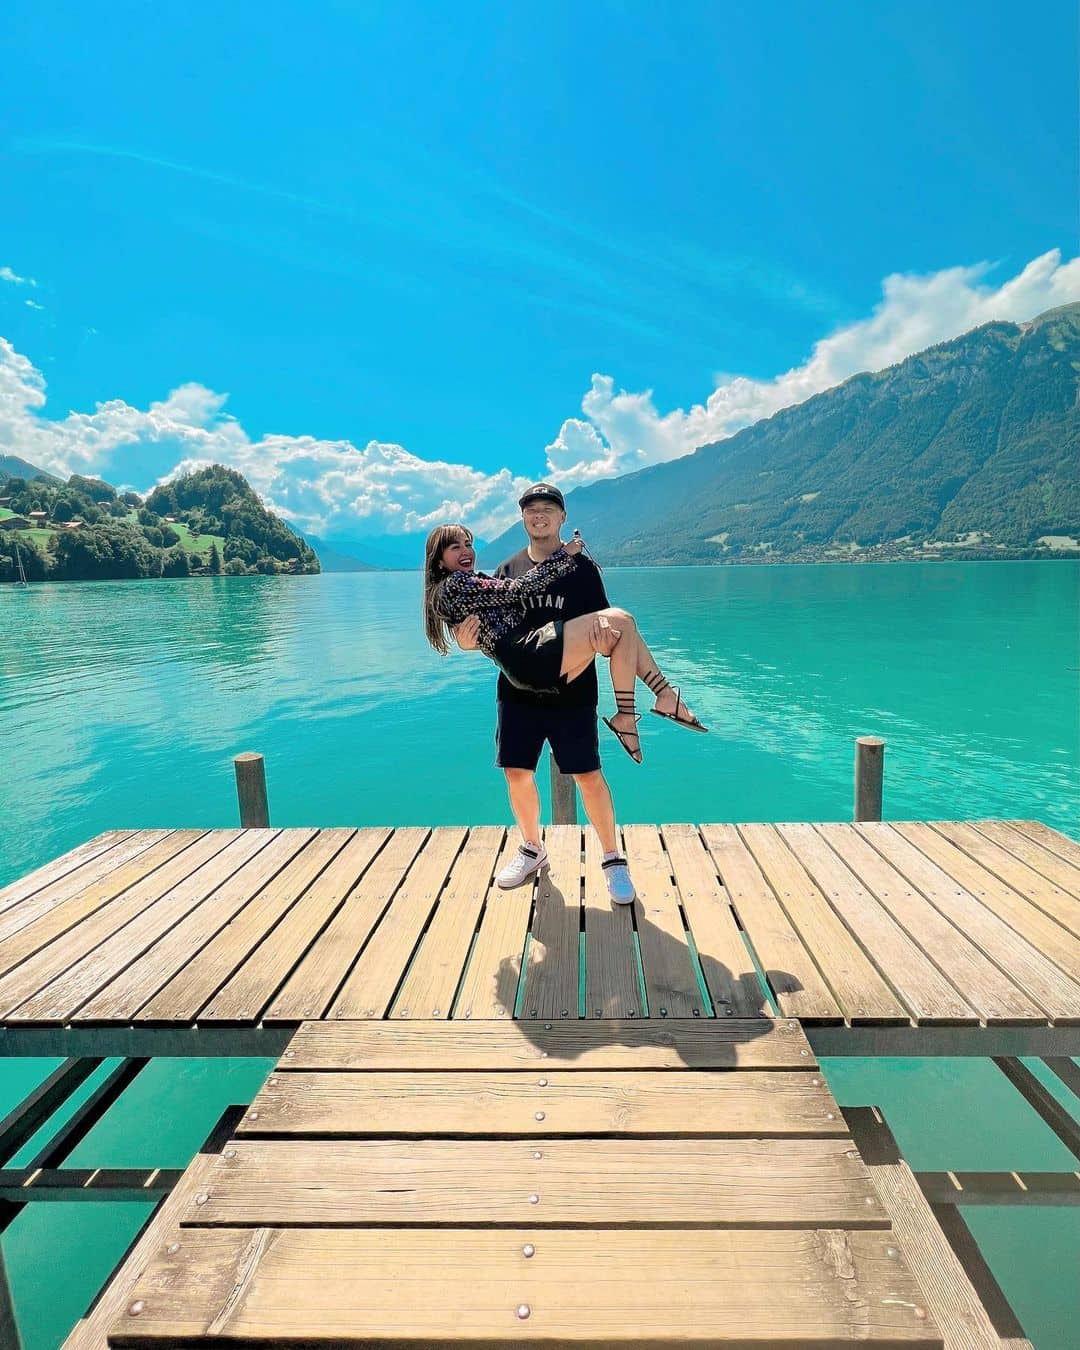 Kris Bernal and Perry Choi visit piano scene location in Switzerland from Crash Landing On You